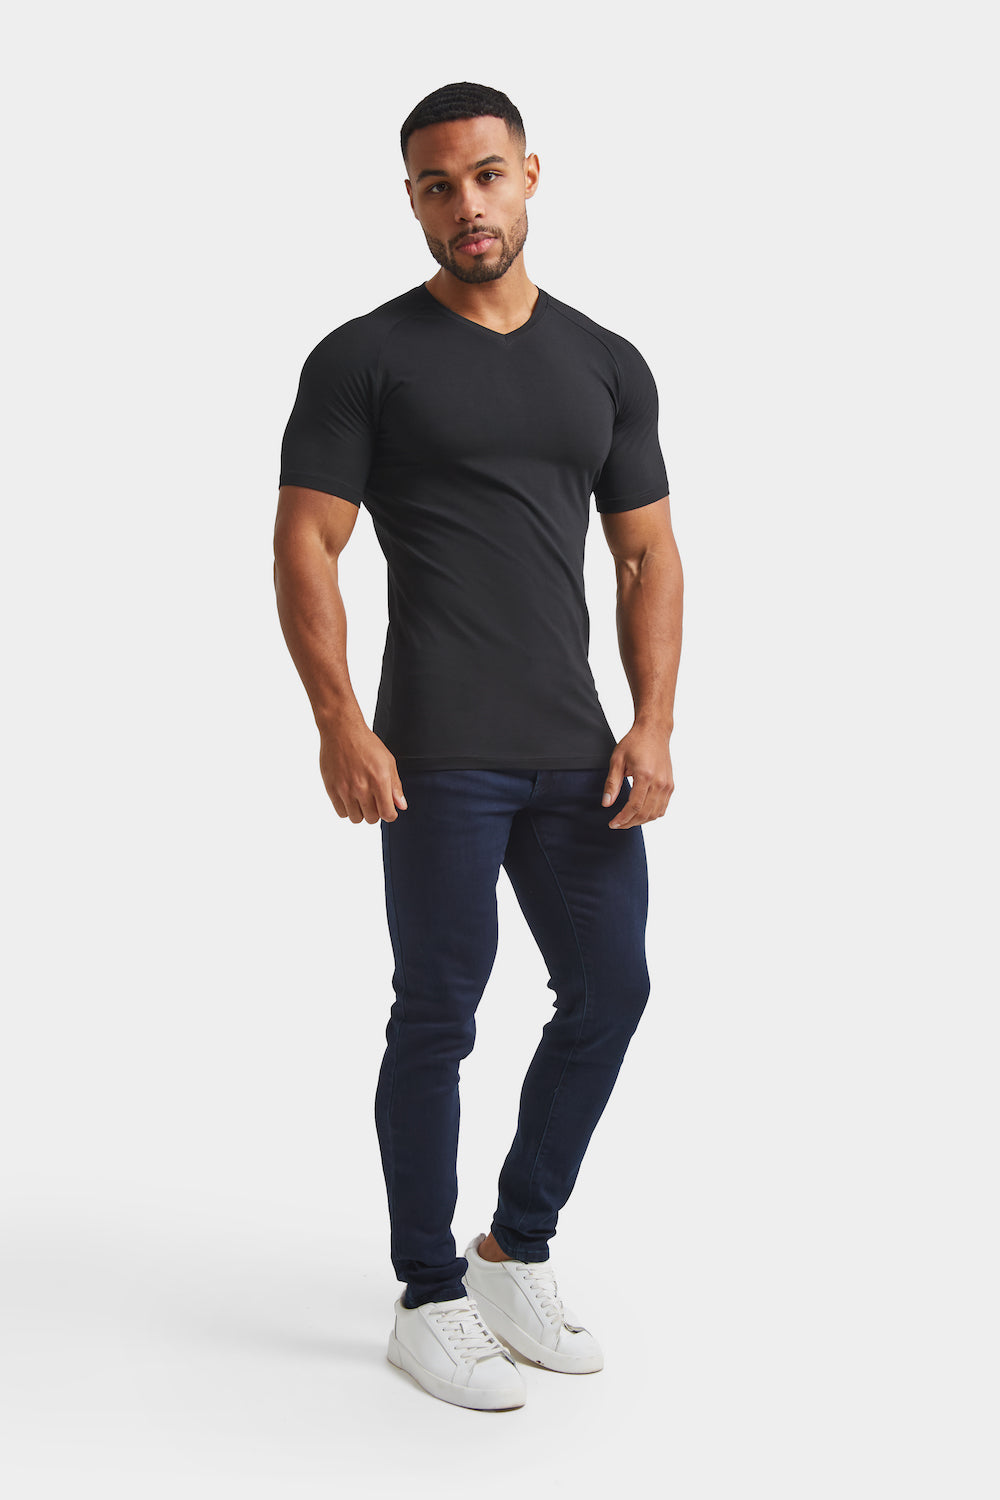 Premium Muscle Fit V-Neck in Black - TAILORED ATHLETE - ROW